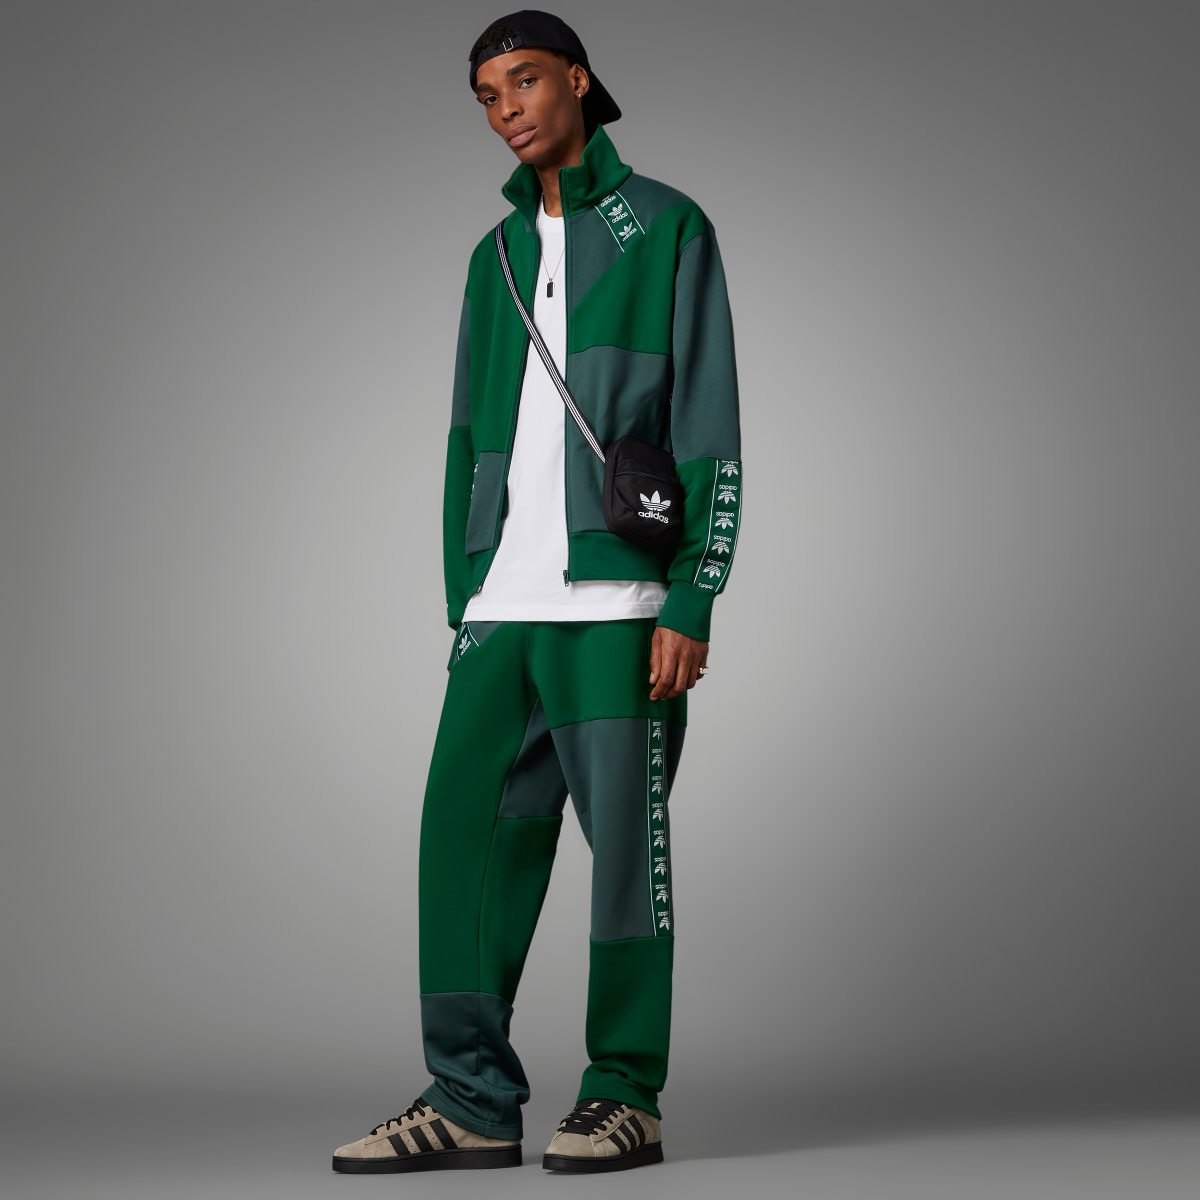 Adidas ADC Patchwork FB Track Top. 7